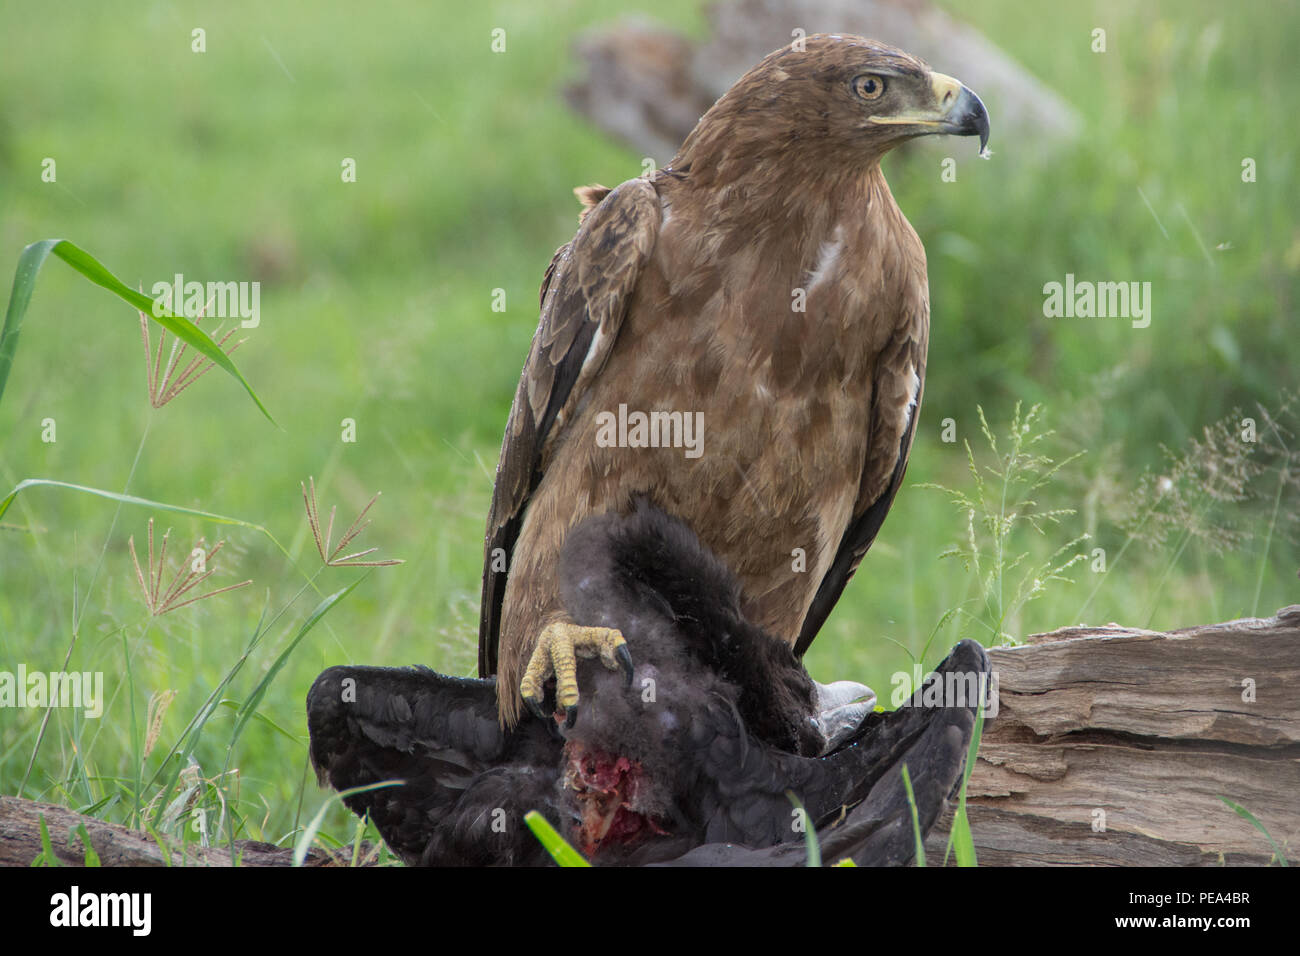 An African Crowned Eagle feeding on another bird in Serengeti national Park, Tanzania. Stock Photo